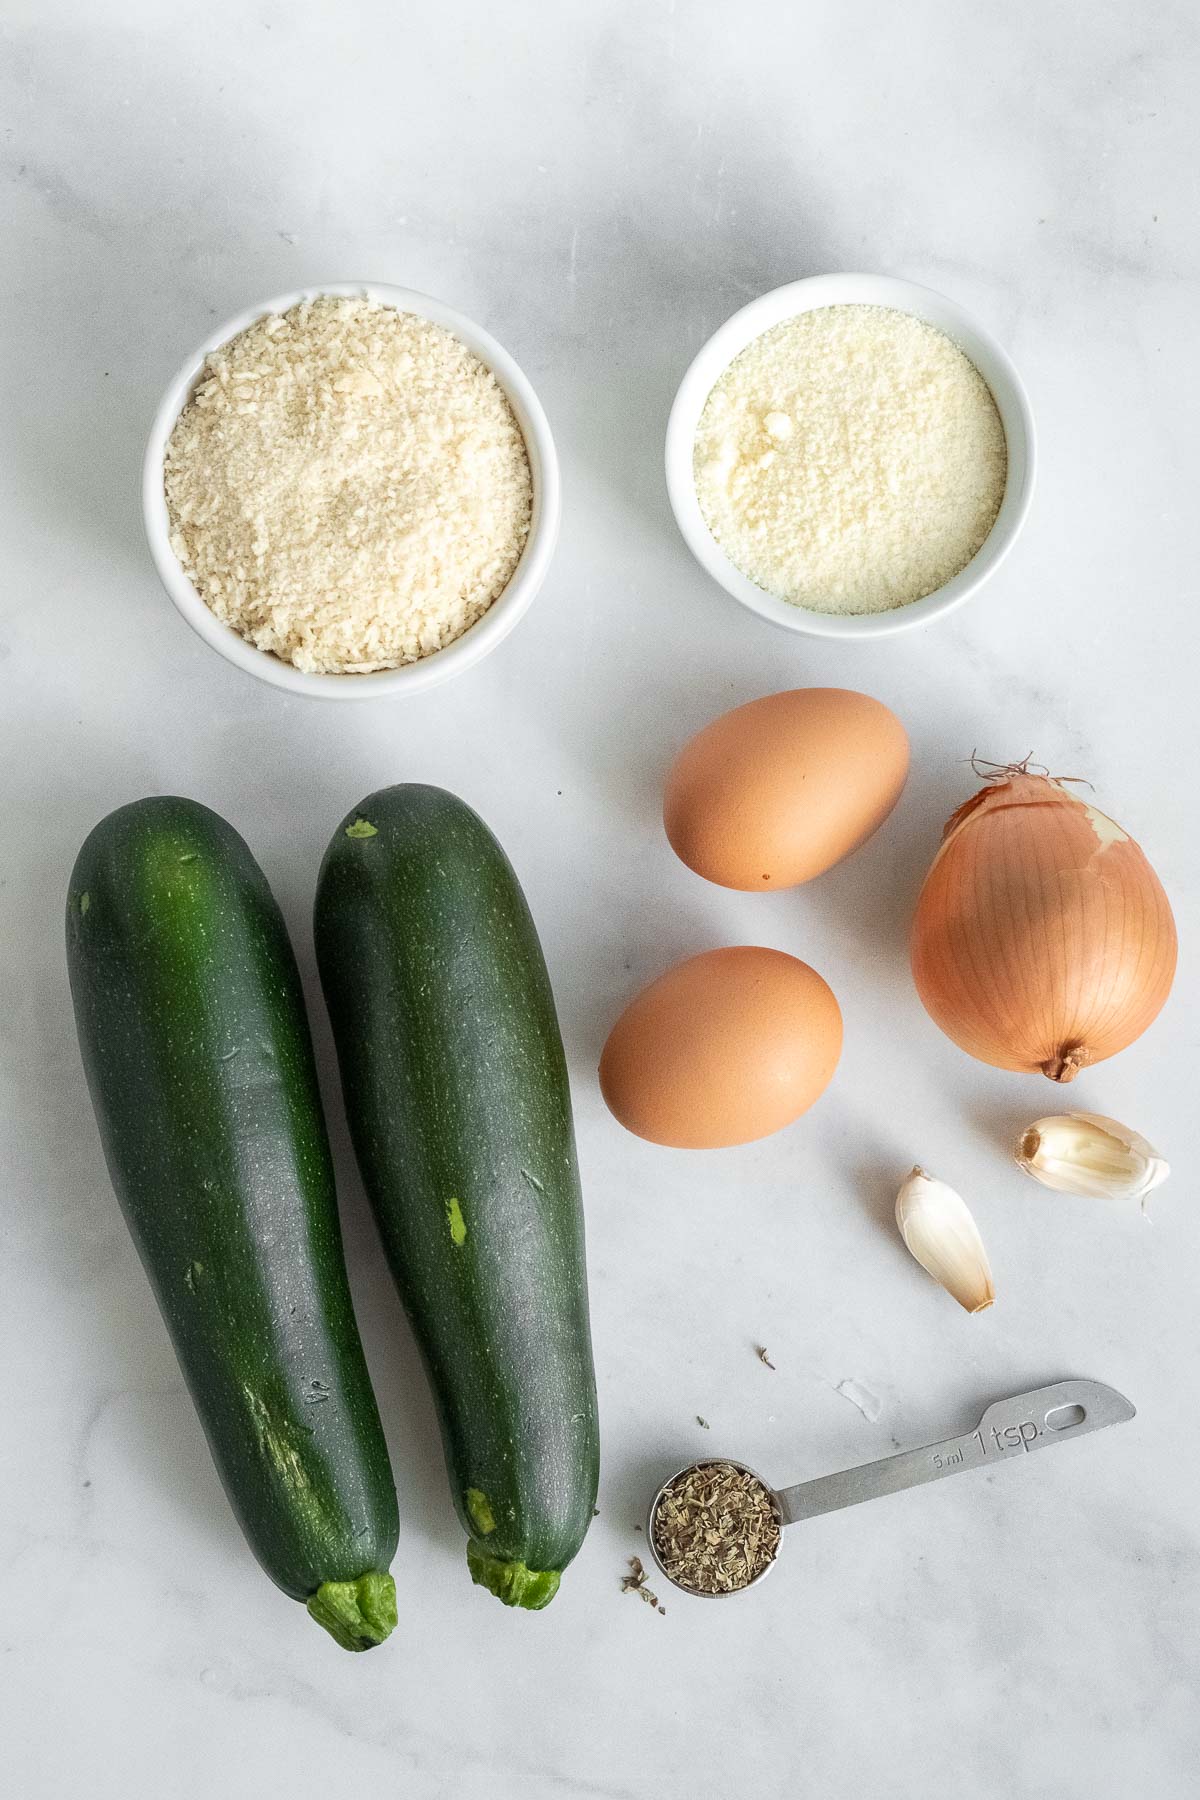 two zucchini, 2 eggs, one onion, bowl of breadcrumbs, bowl of parmesan cheese